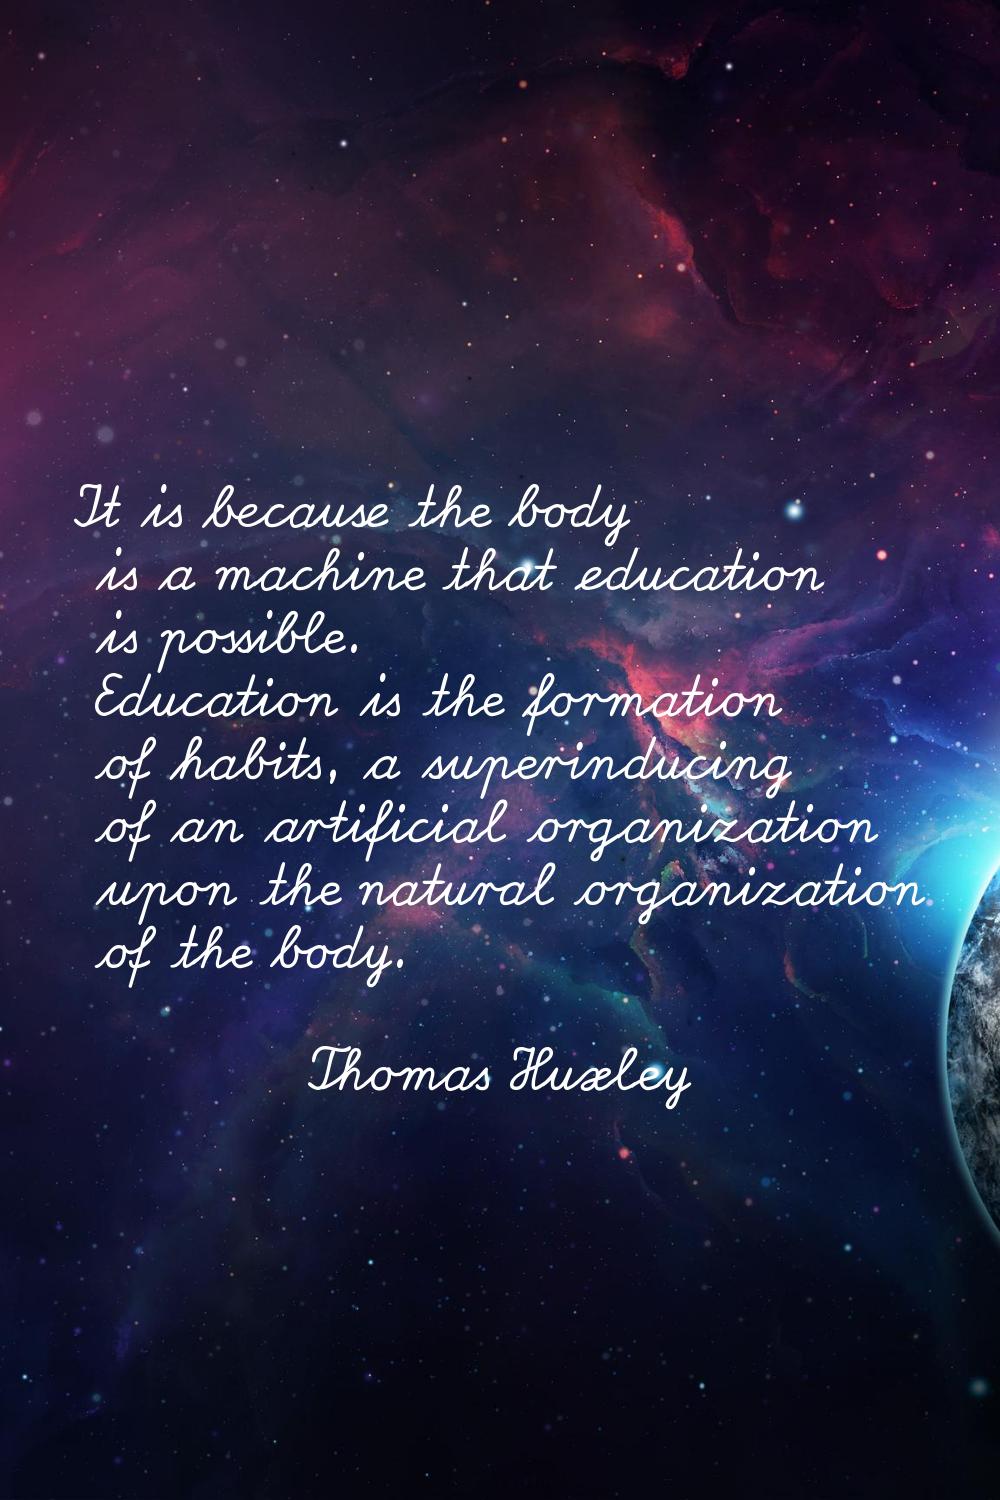 It is because the body is a machine that education is possible. Education is the formation of habit